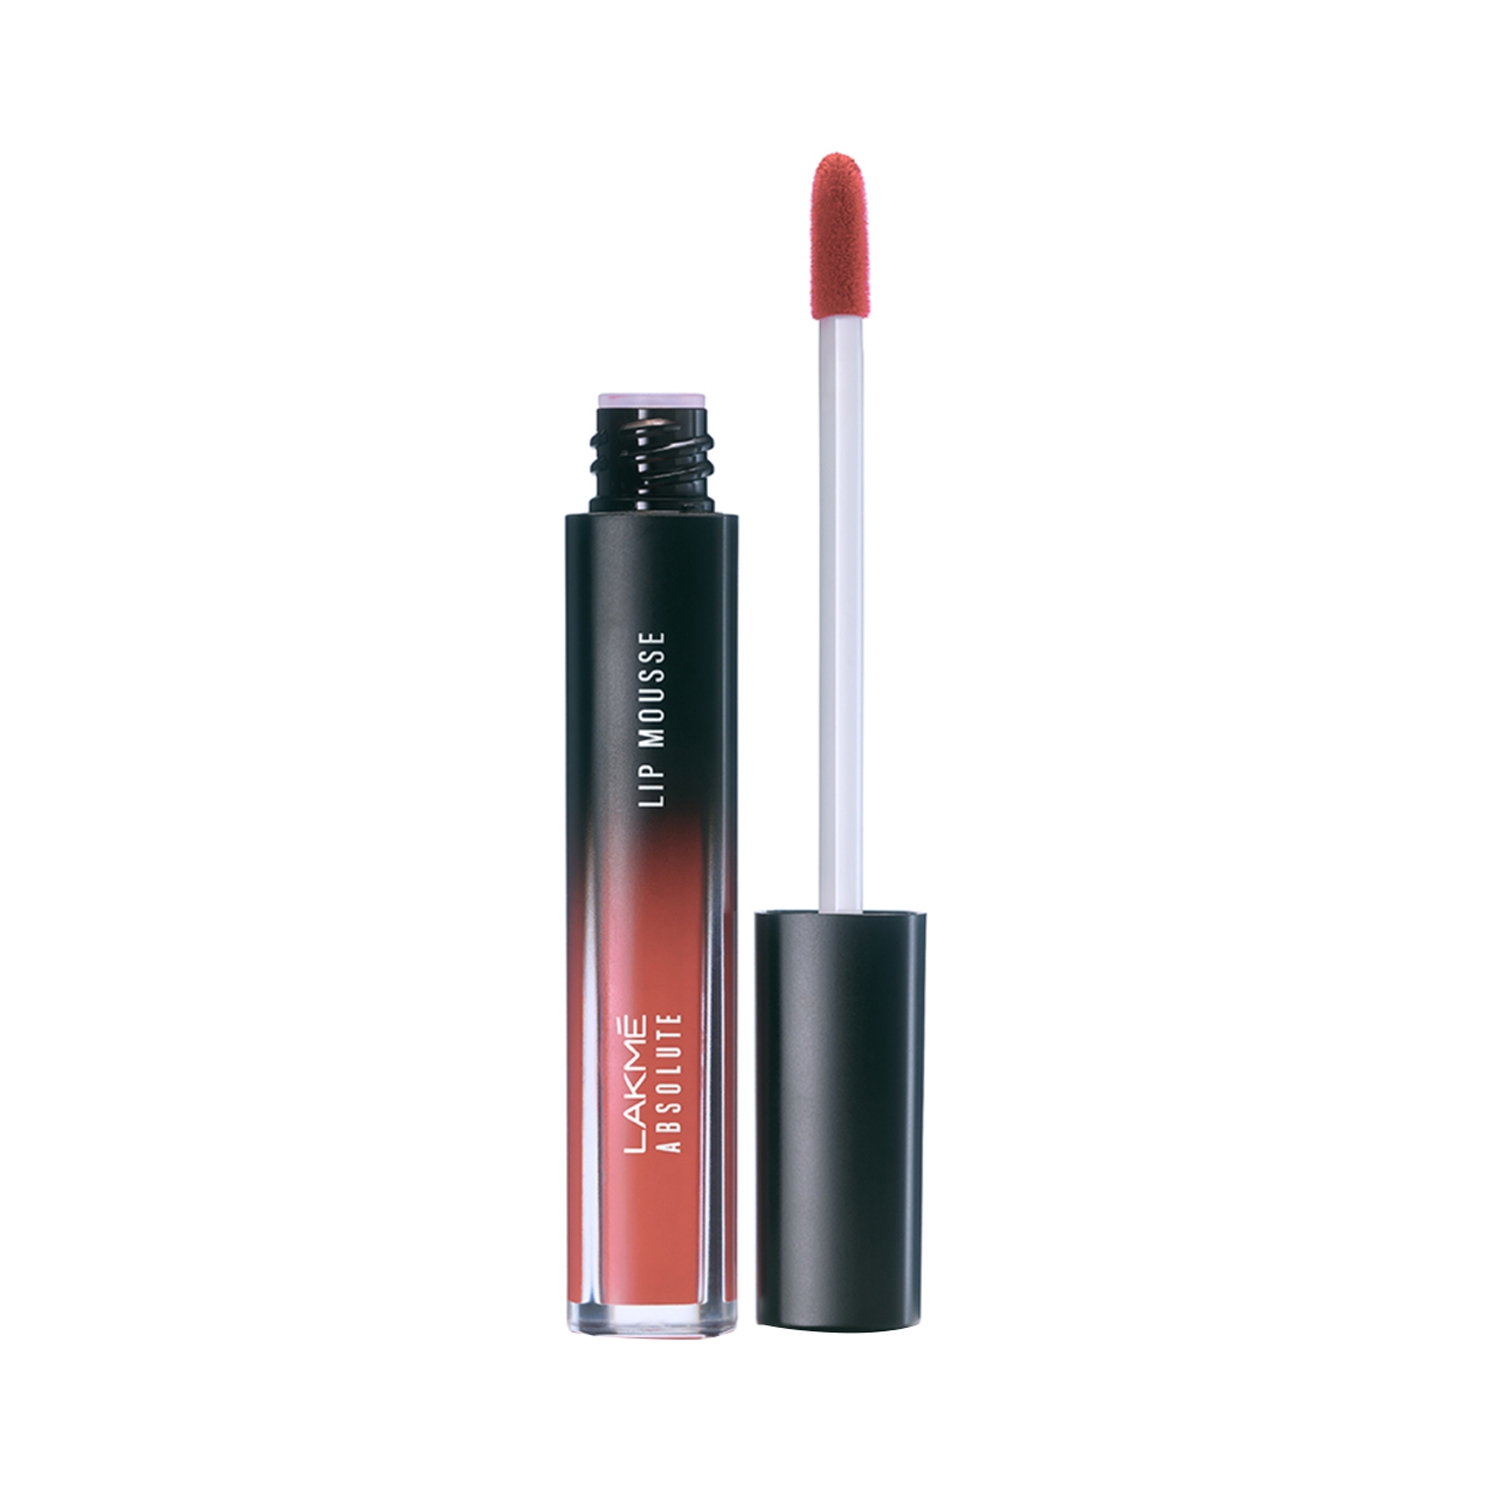 Lakme | Lakme Absolute Sheer Lip Mousse - 303 Nude Naturalle (4.6g)